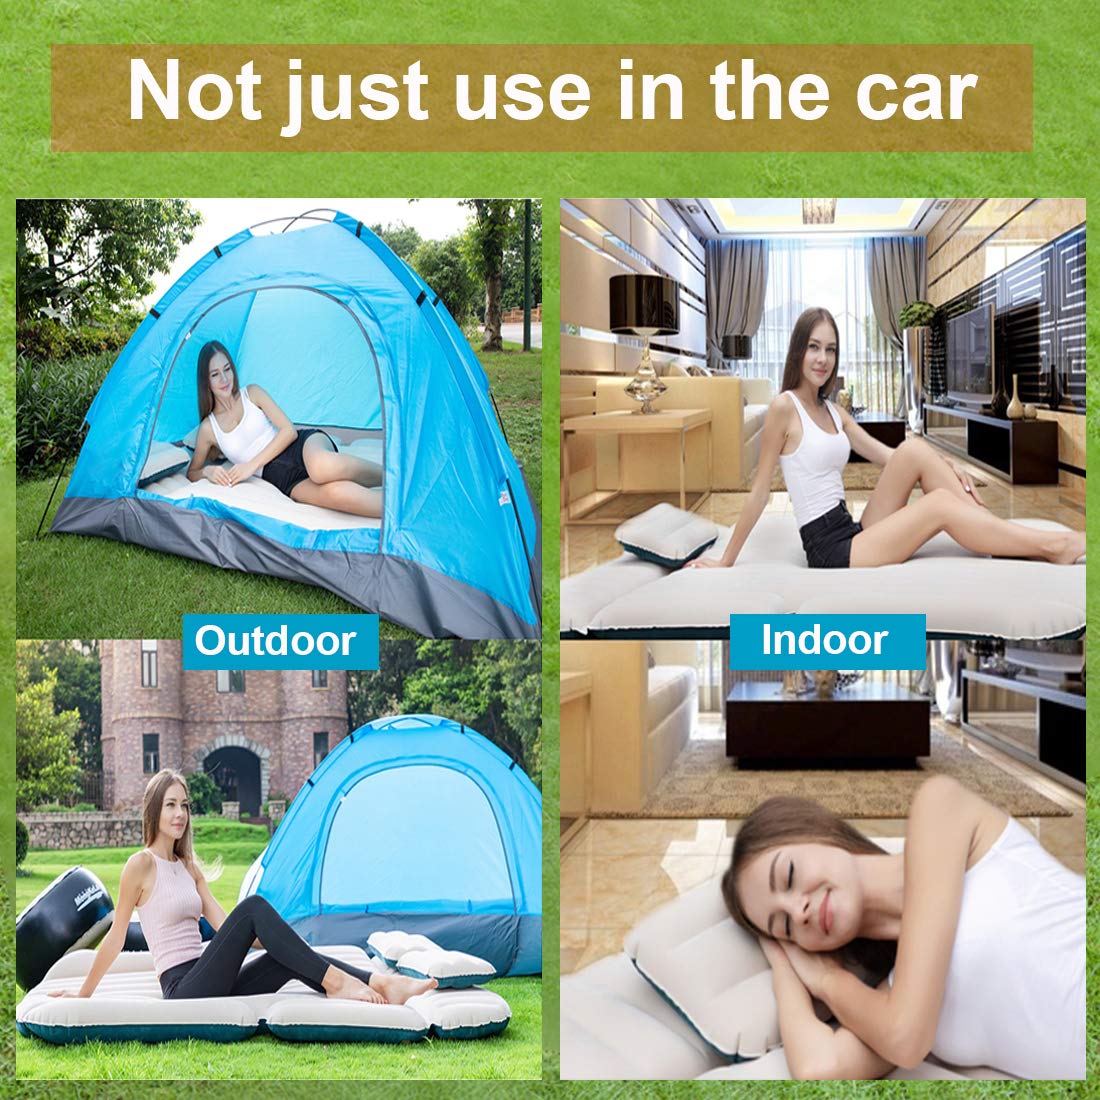 WEY&FLY SUV Air Mattress Thickened and Double-Sided Flocking Travel Camping Bed Dedicated Mobile Cushion Extended Outdoor for Ba